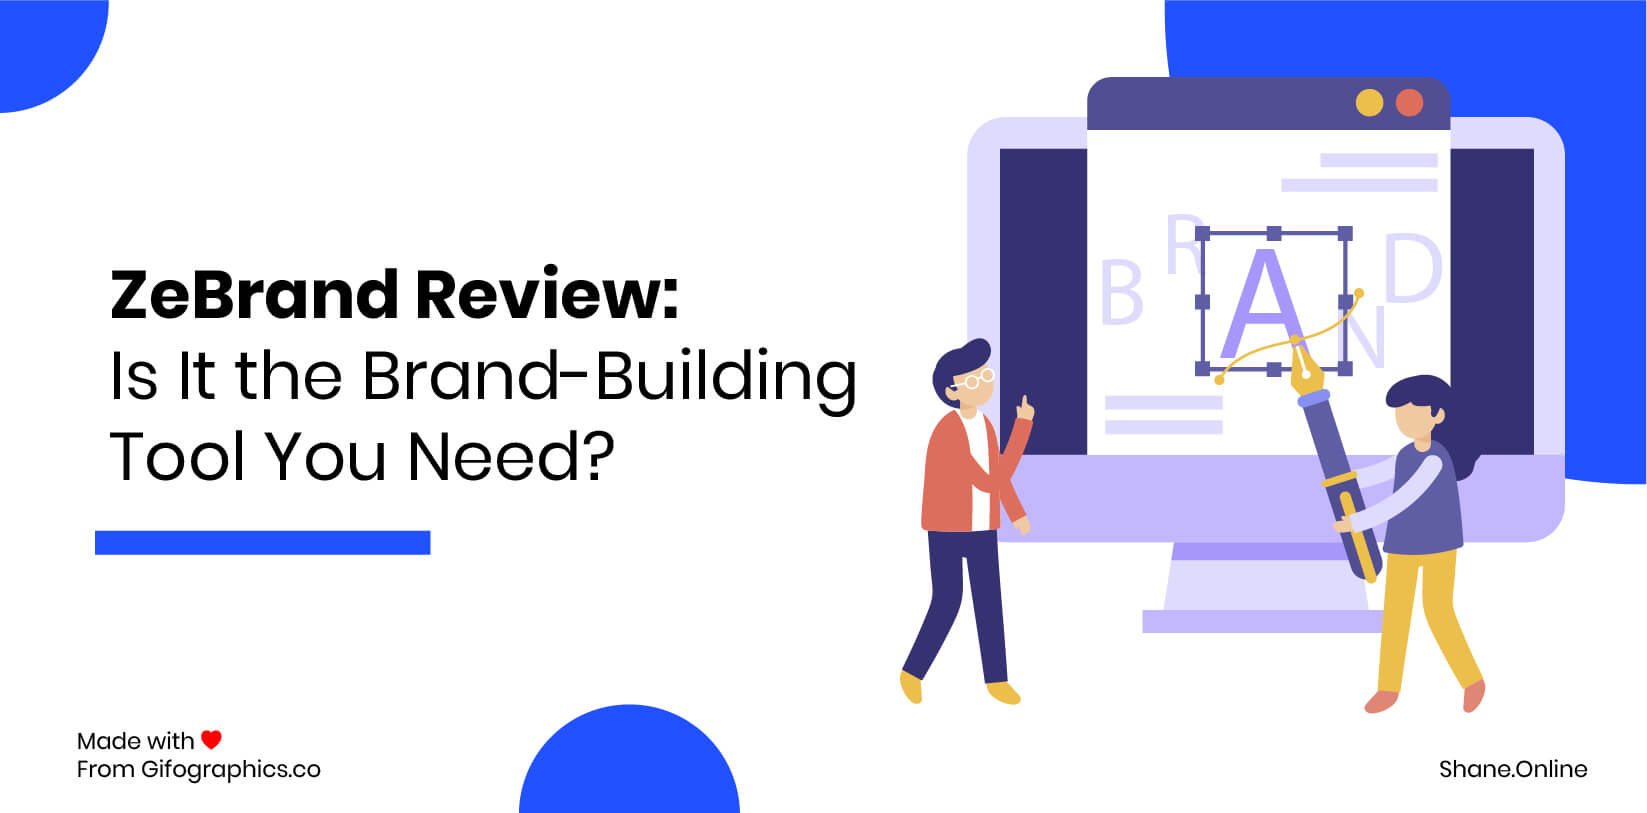 ZeBrand Review- Is It the Brand-Building Tool You Need